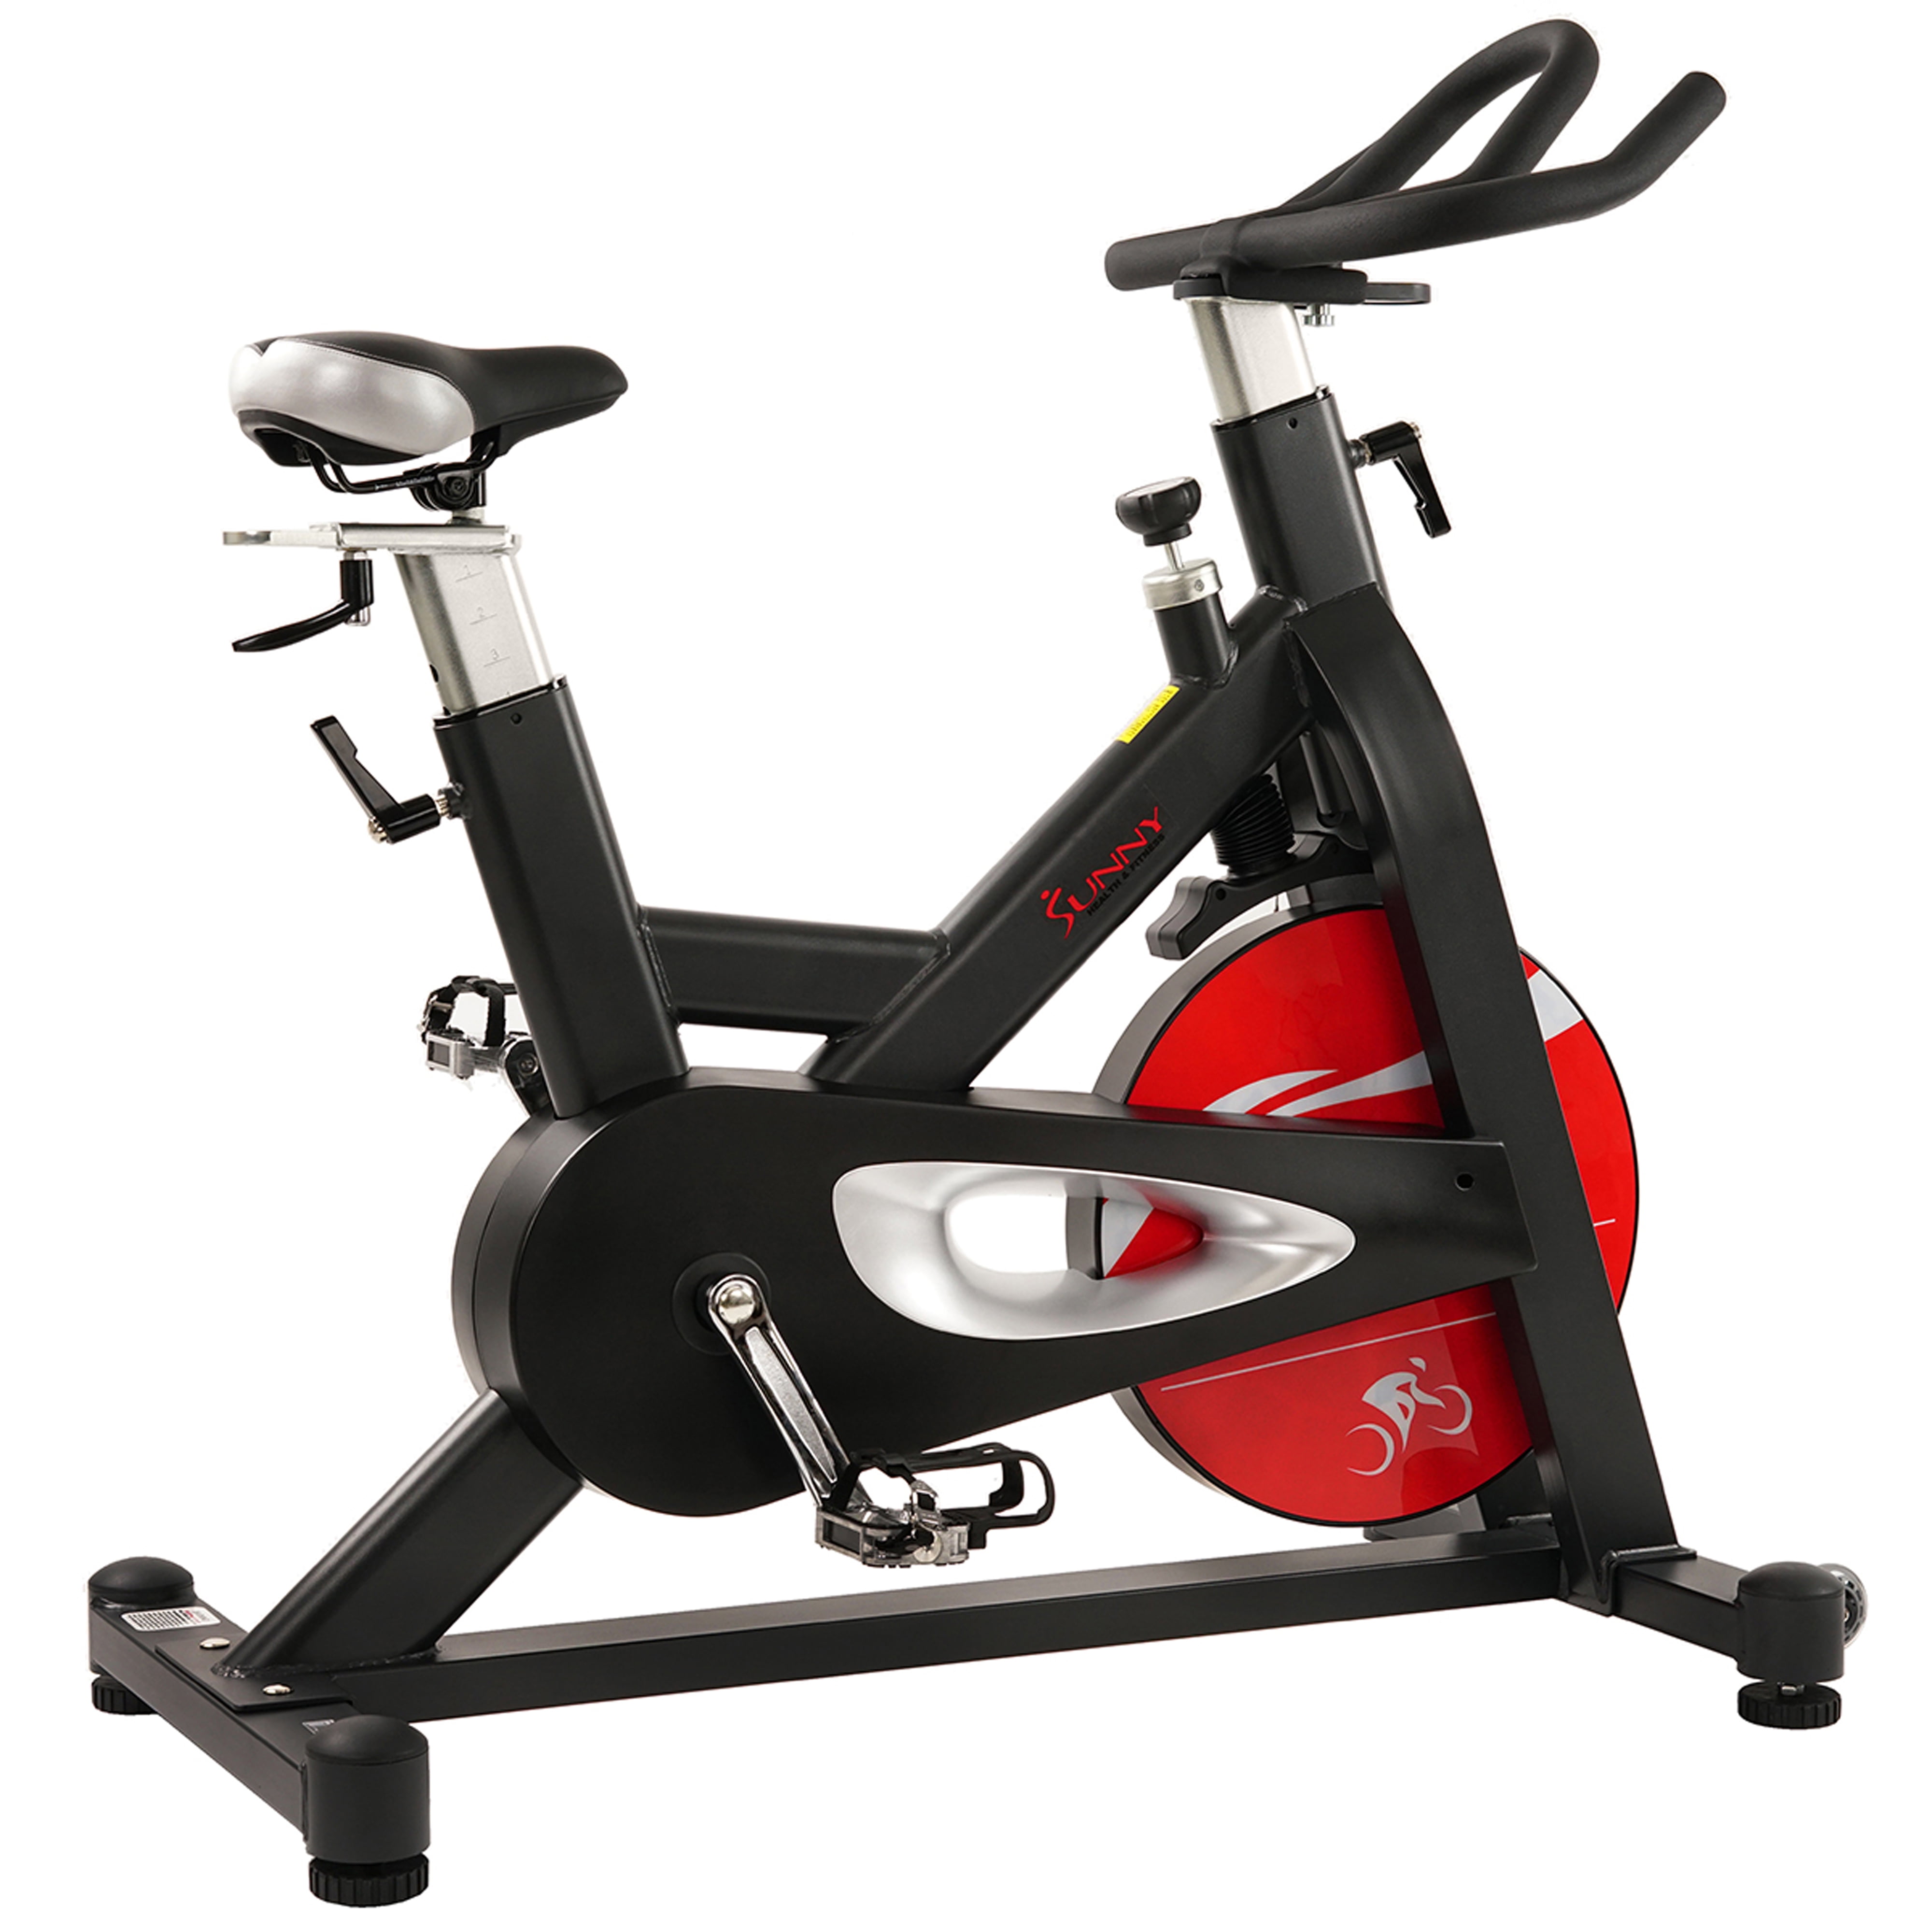 Evolve-Exercise Spin Bike Studio Cycle Indoor Training Home Gym Bicycle Cardio 